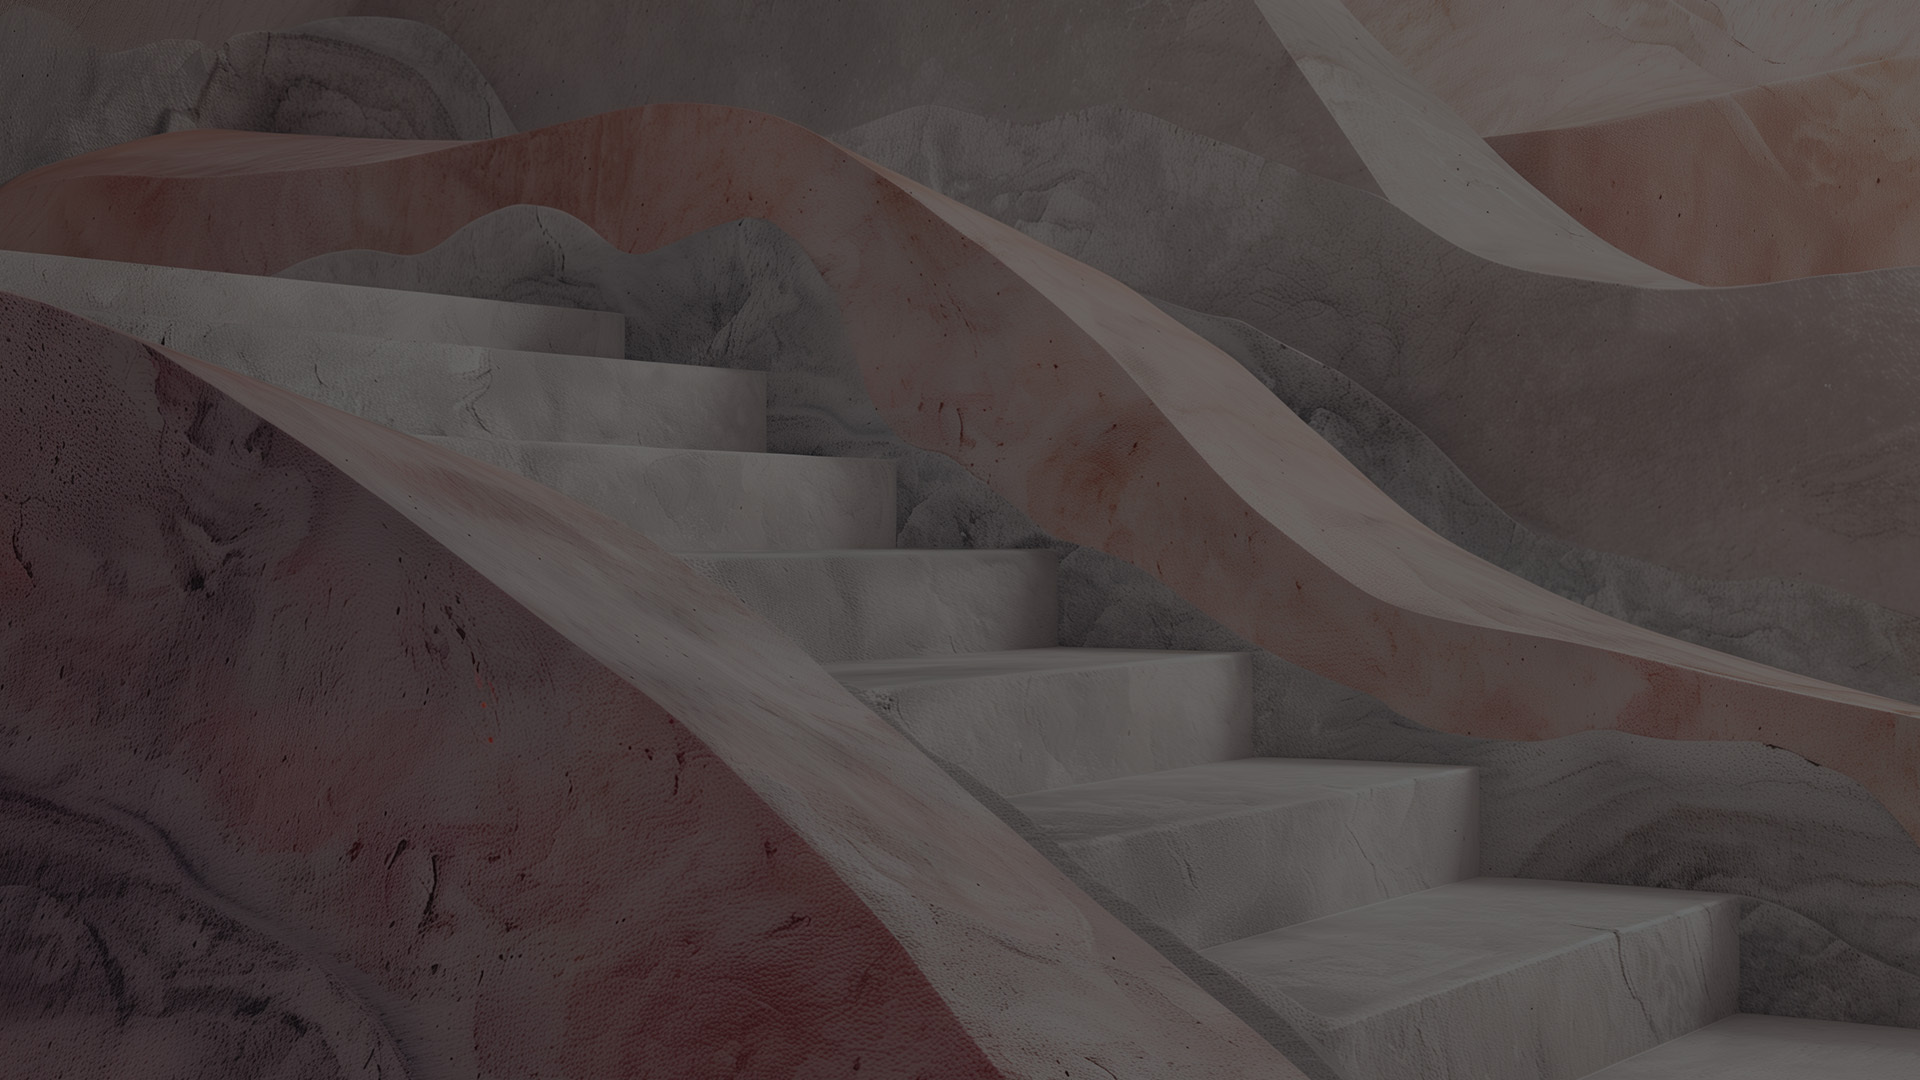 Abstract image with stairs